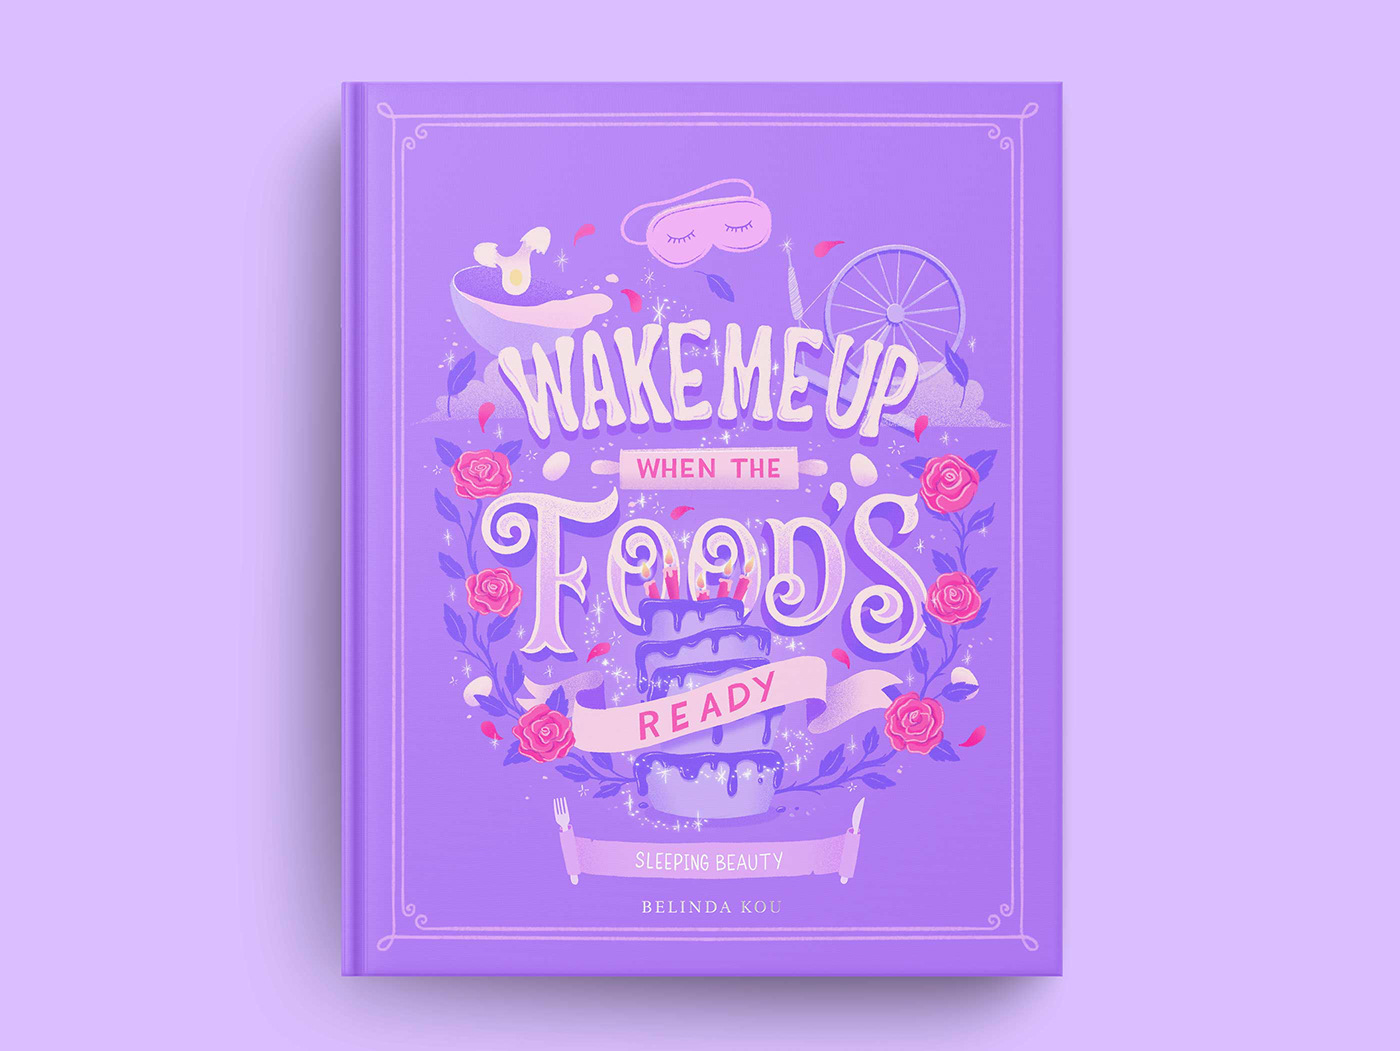 Sleeping Beauty book cover art featuring hand lettering and illustrations of fairy tale and food art